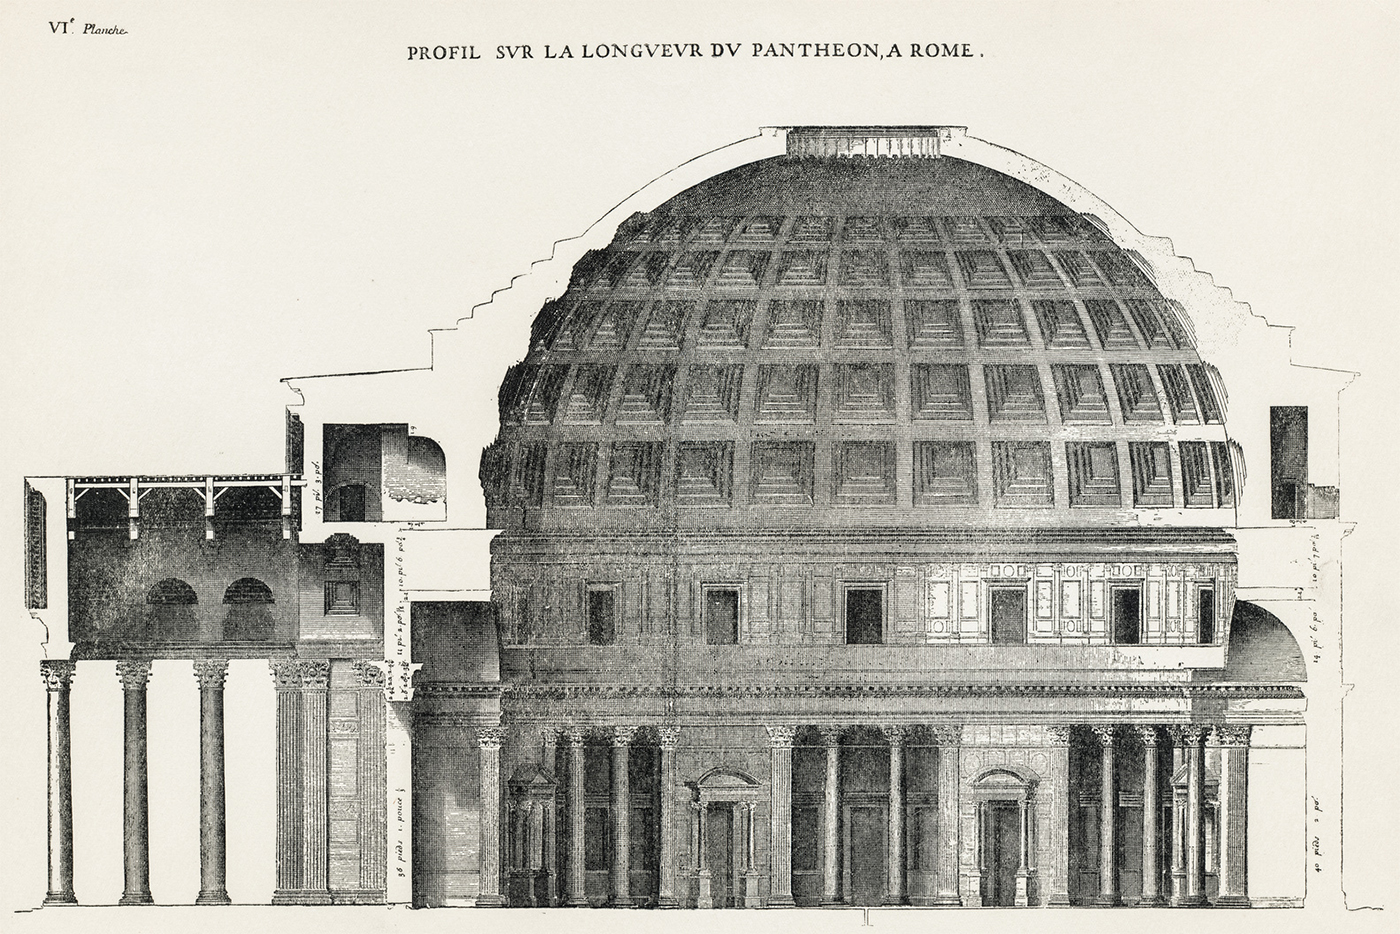 A section of the project for the Pantheon